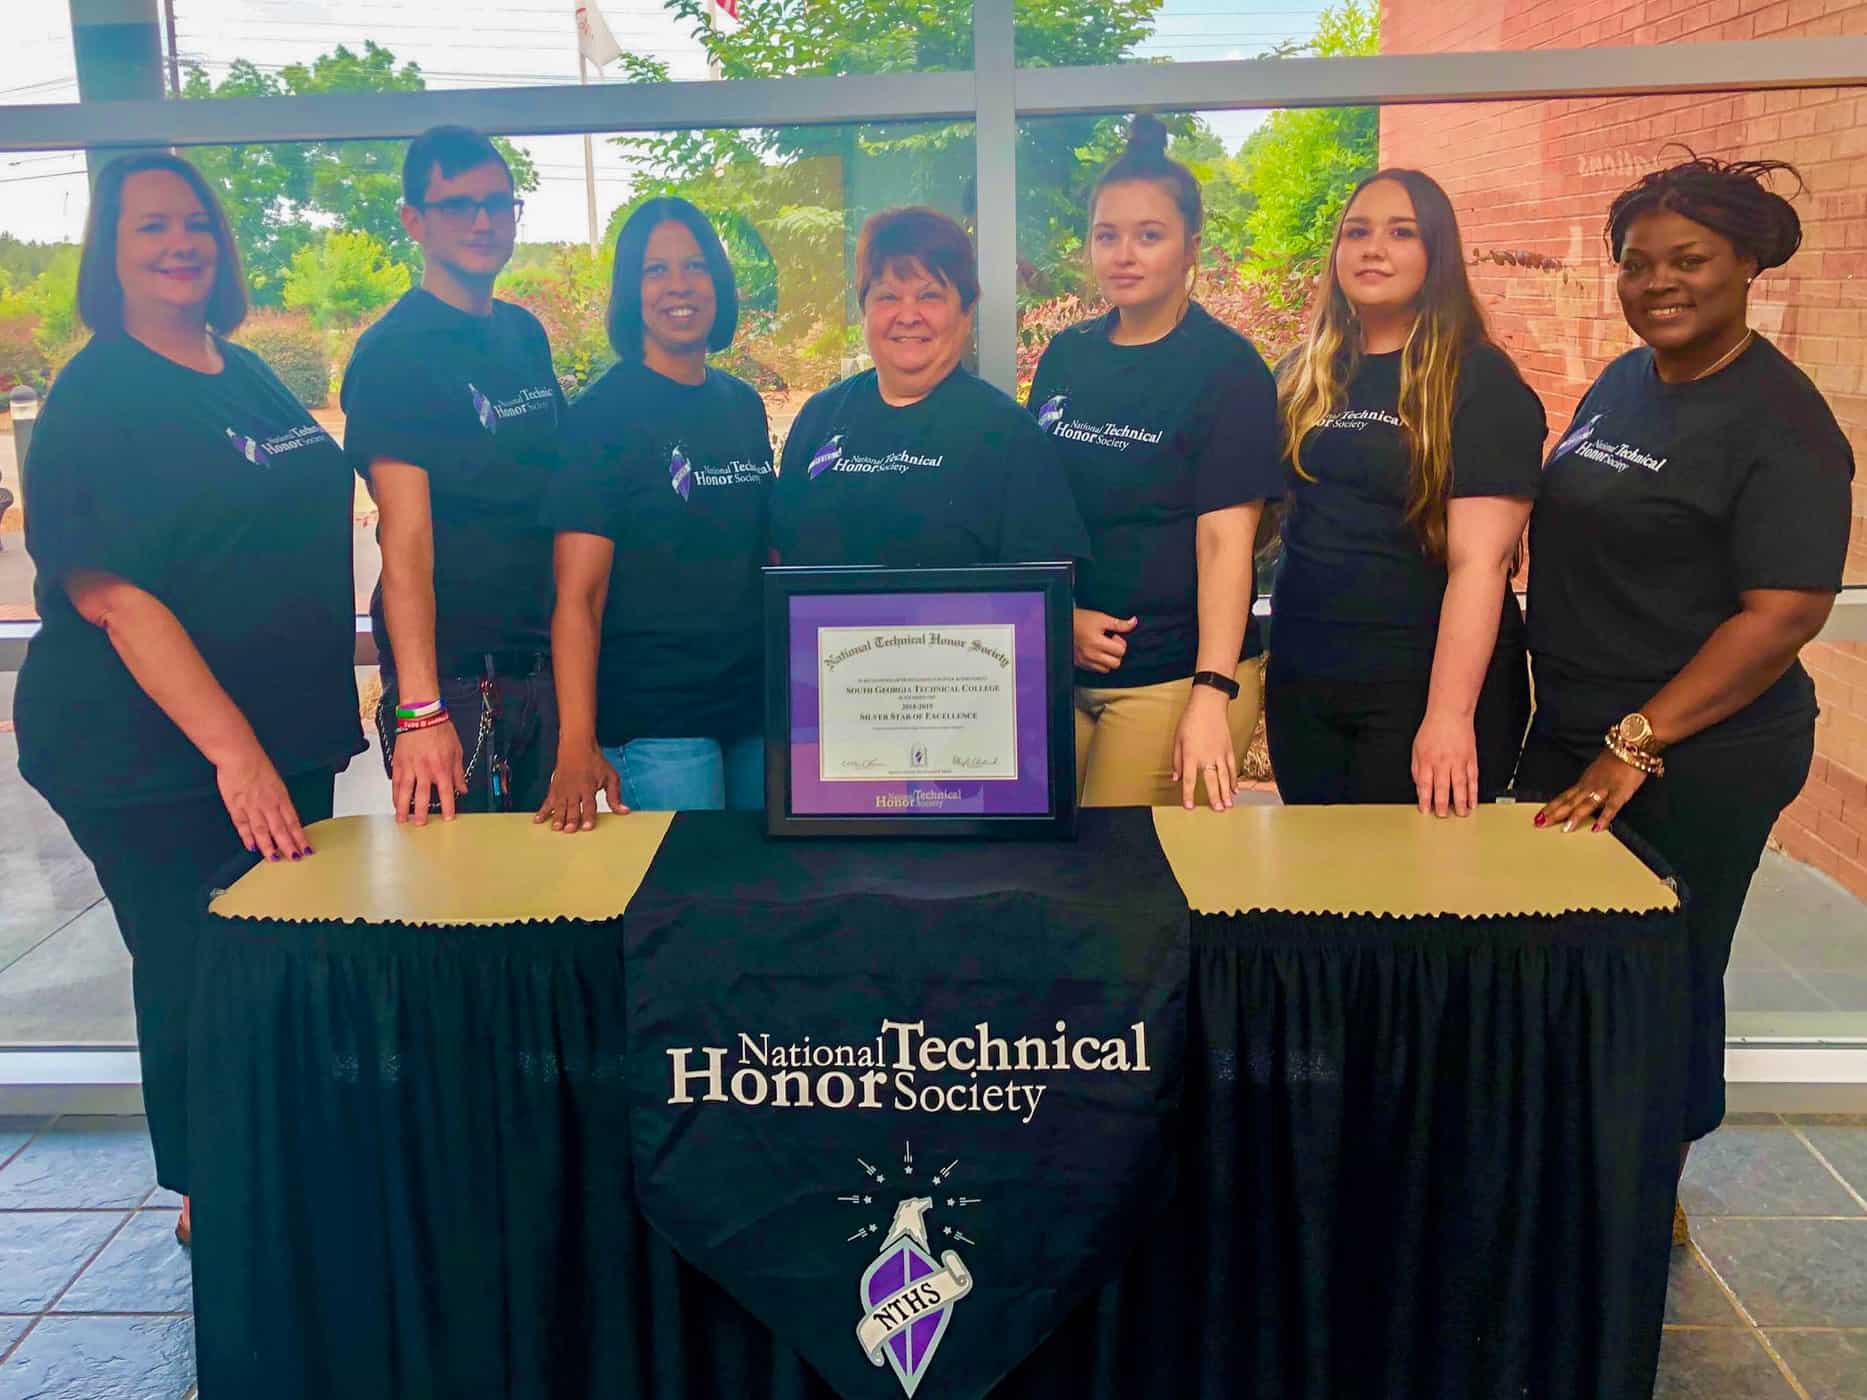 National Technical Honor Society members and advisors stand with their Silver Star of Excellence award, given for their outstanding community service during the 2018-2019 academic year. Left to right: Kari Bodrey, NTHS advisor; Christopher Mathews, NTHS President; Nicole Embry, NTHS Vice President; Evelyn Castleberry, NTHS member; Kennedy Allen, NTHS member; Samantha Campbell, NTHS Secretary; Katrice Taylor, NTHS advisor.